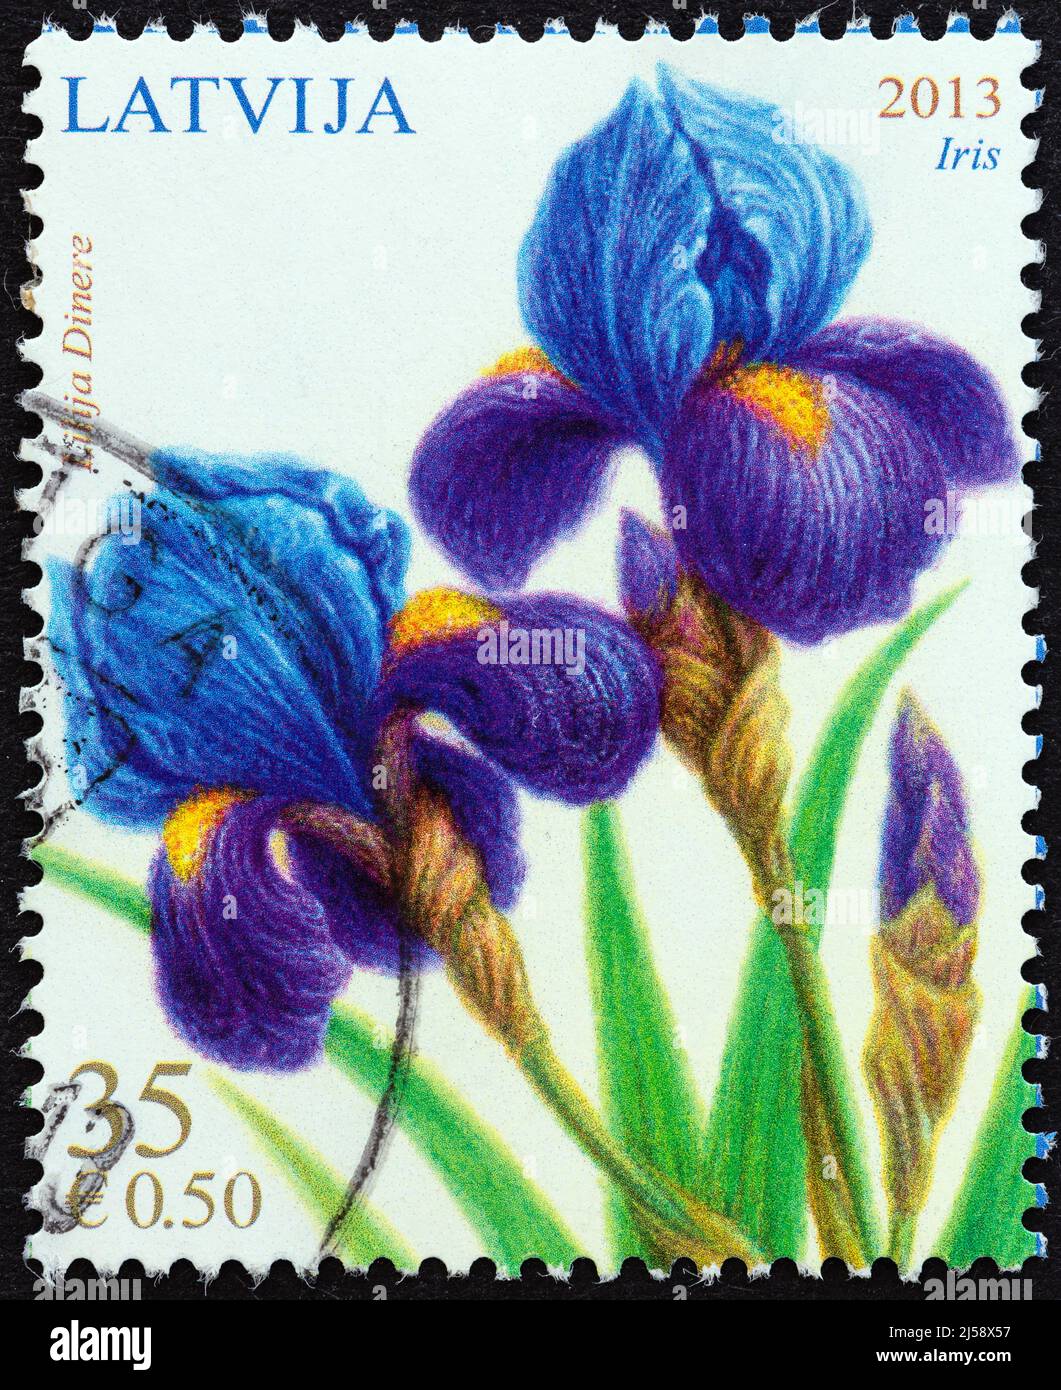 LATVIA - CIRCA 2013: A stamp printed in Latvia from the 'Flowers - Painting by Lilija Dinere' issue shows Iris, circa 2013. Stock Photo